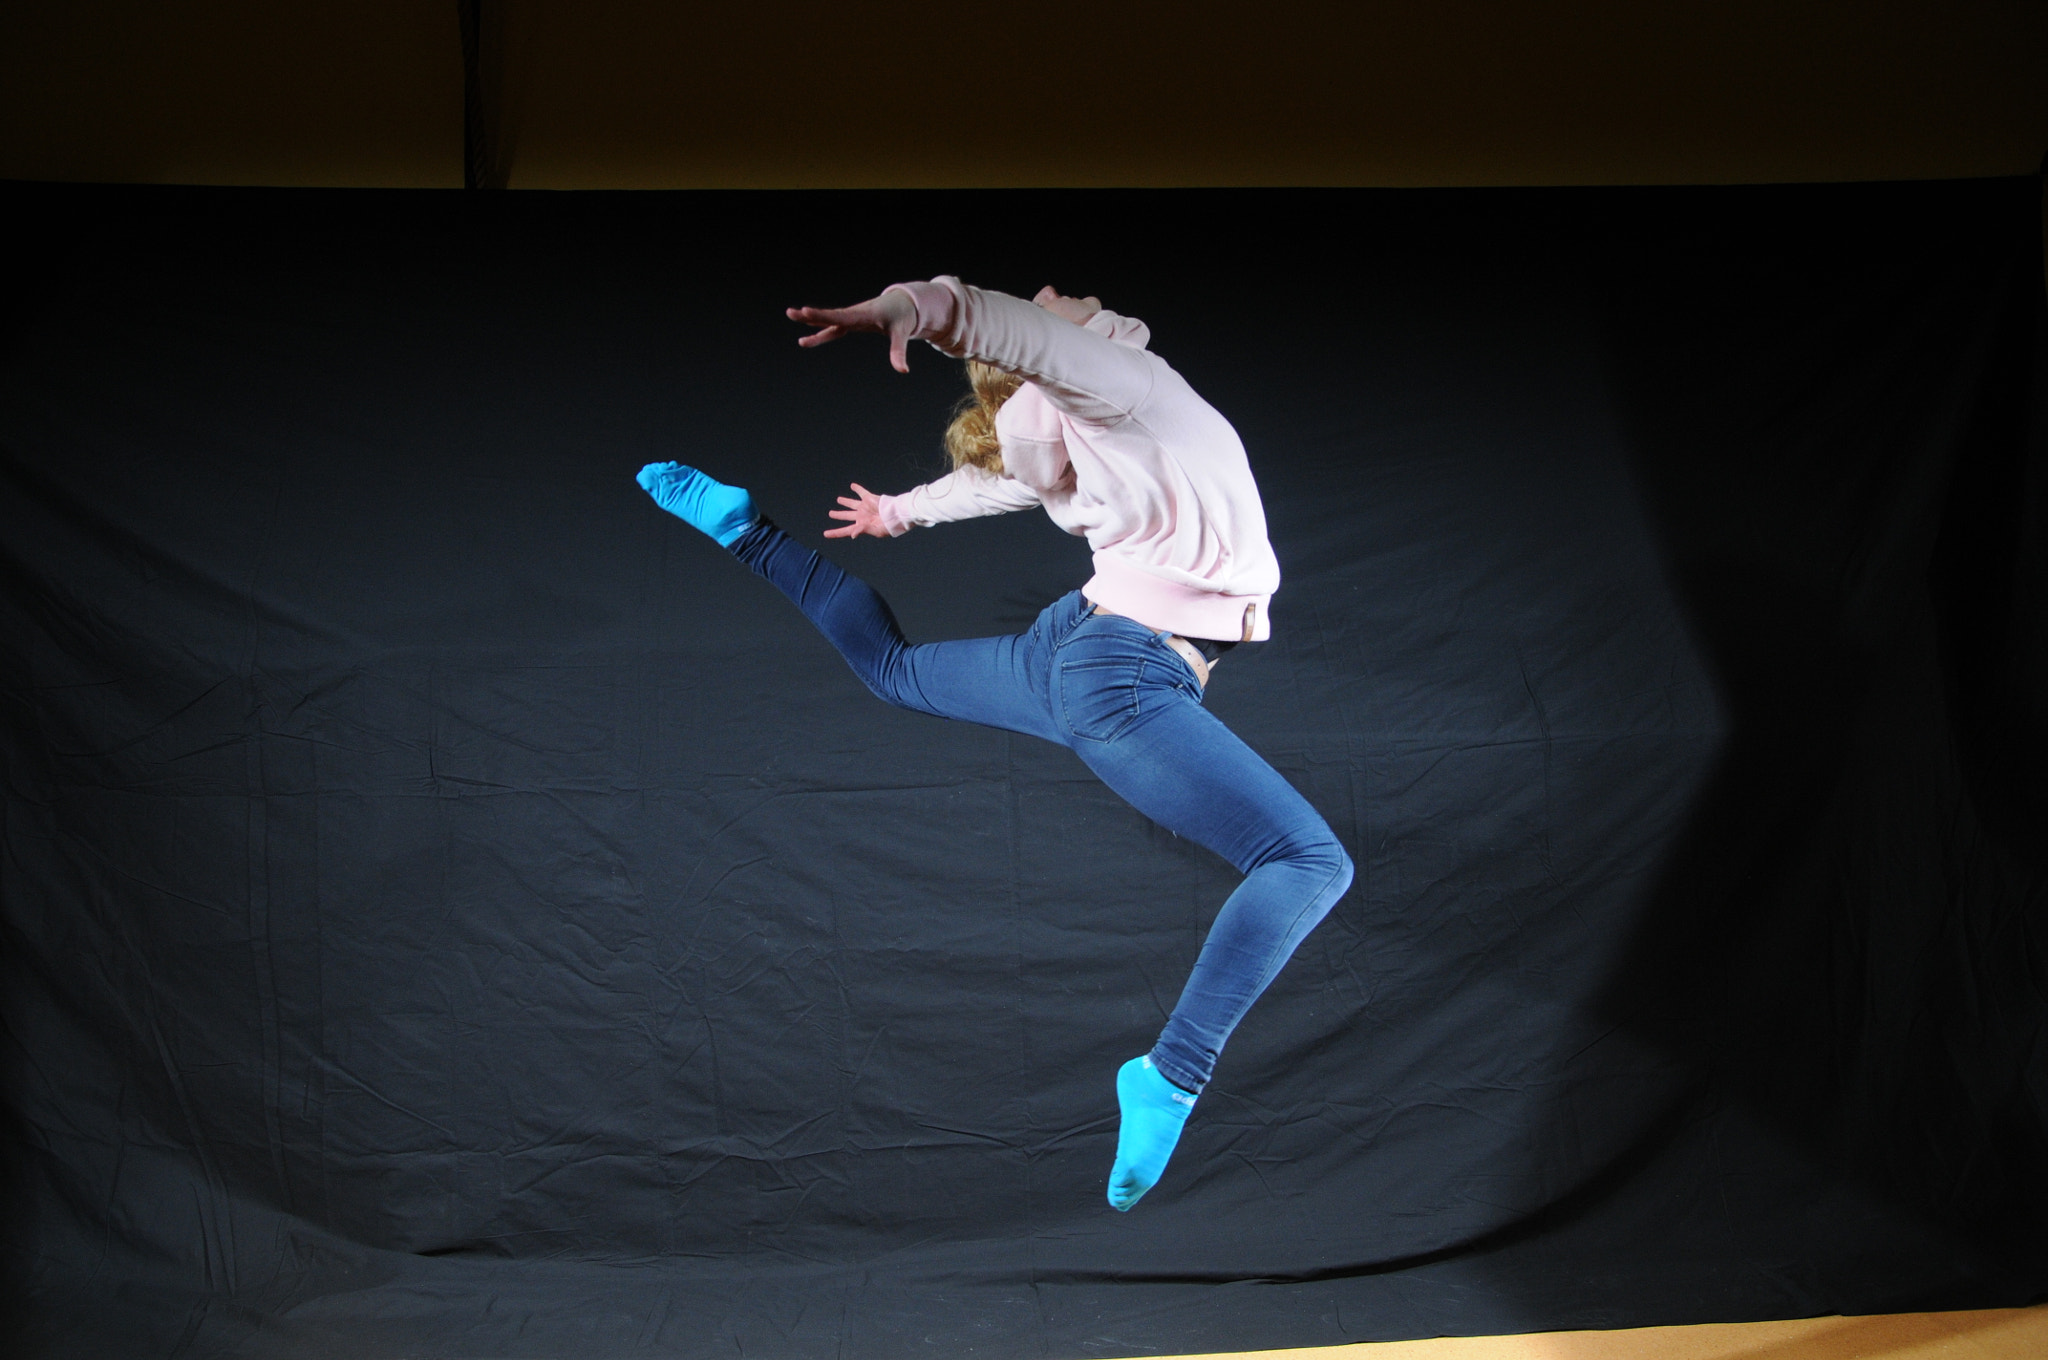 Nikon D300 sample photo. Jump in jeans photography